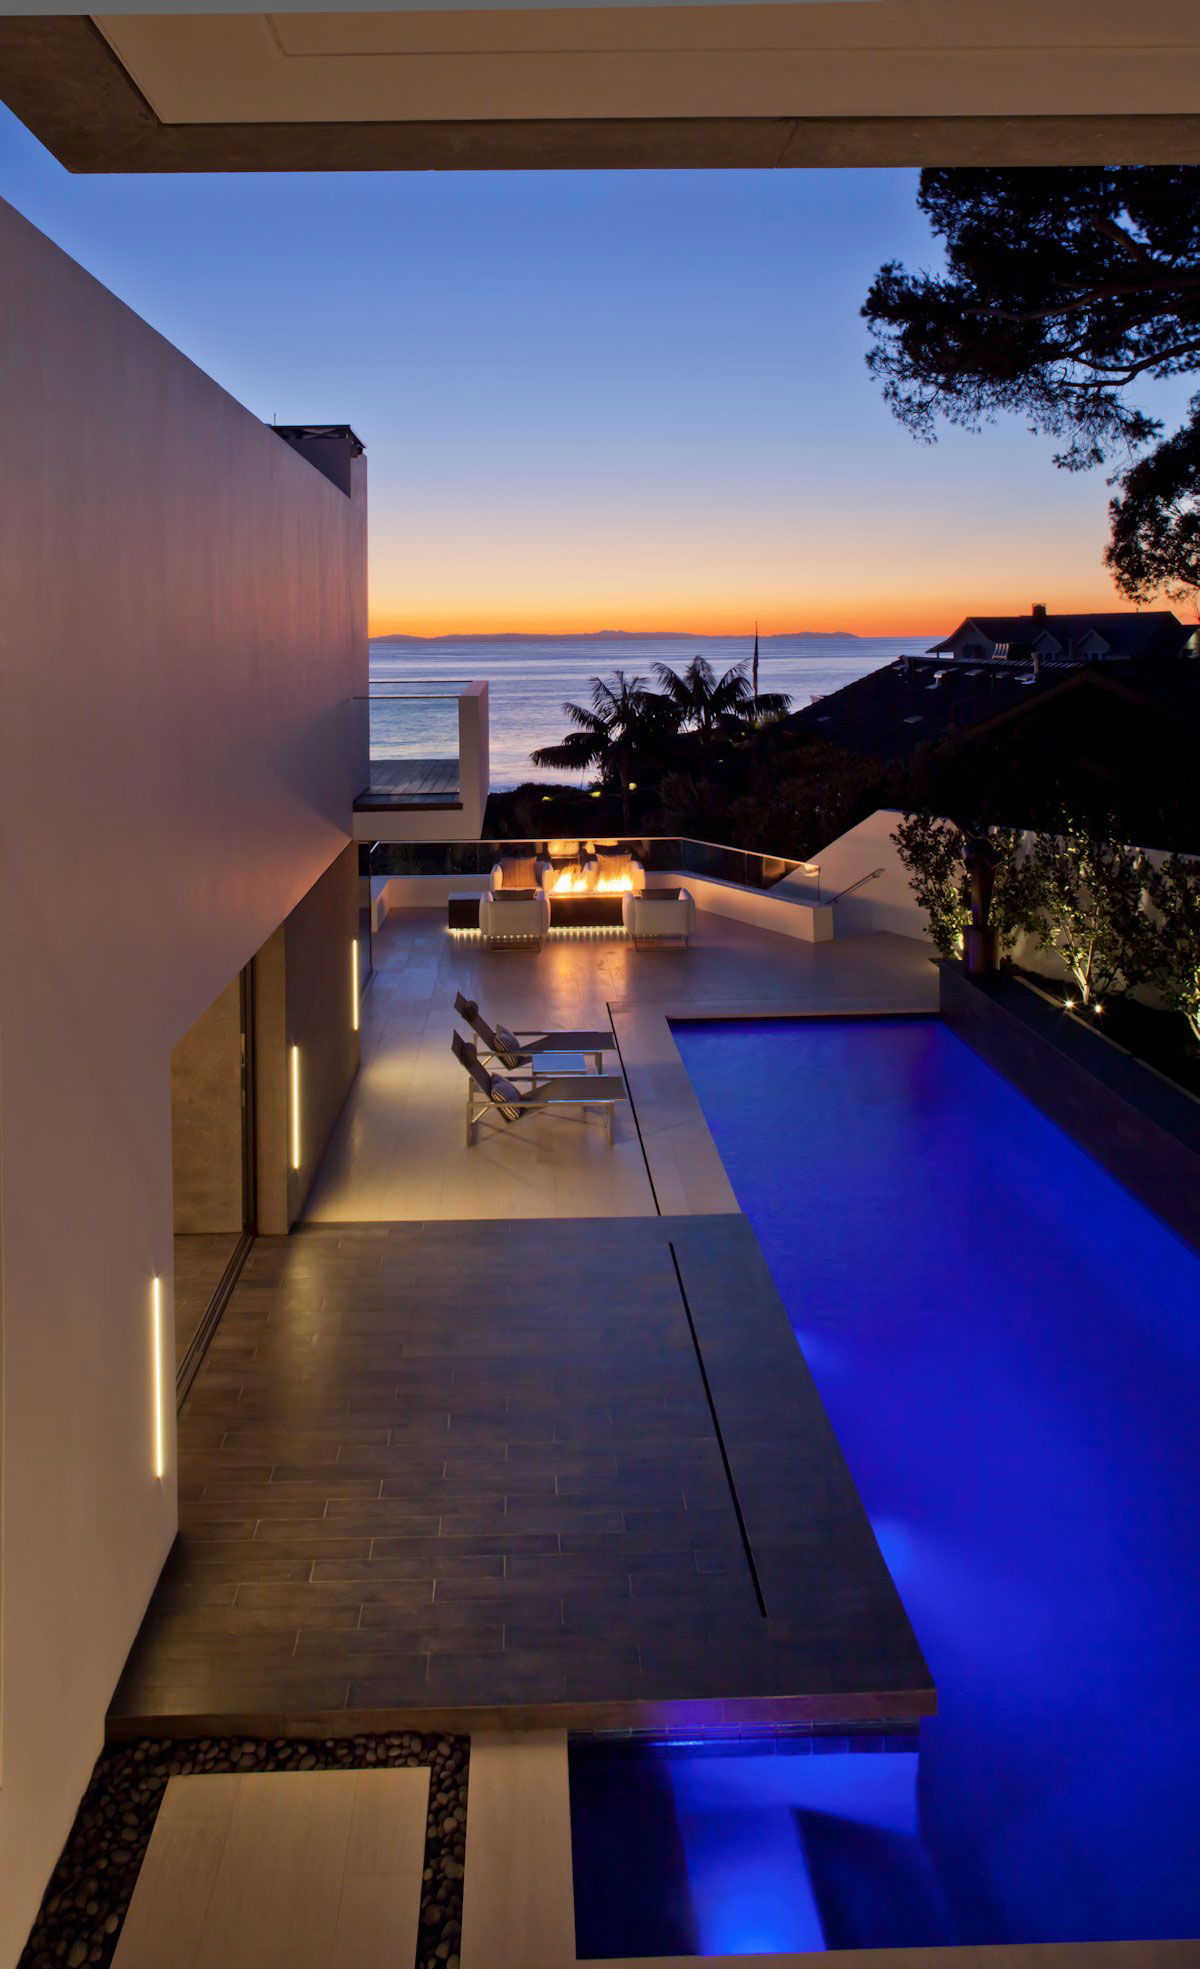 Rockledge By Horst Architects & Aria Design